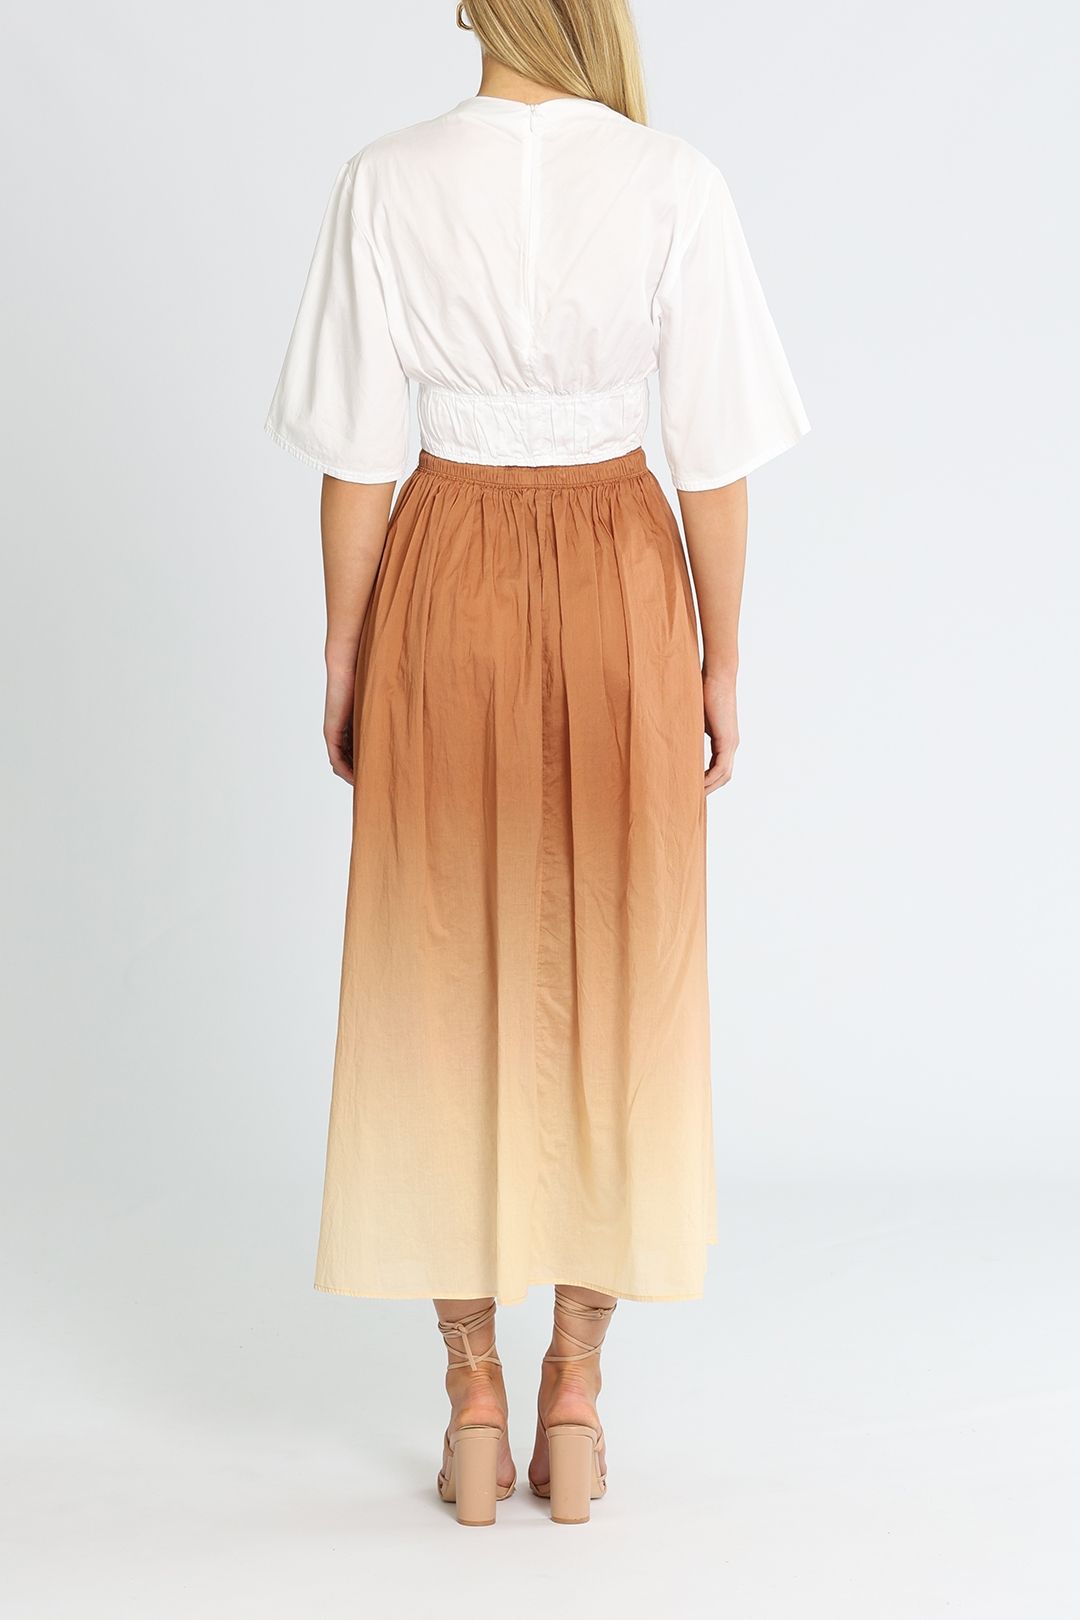 Jac + Jack Isa Ombre Maxi Skirt A Line Silhouette